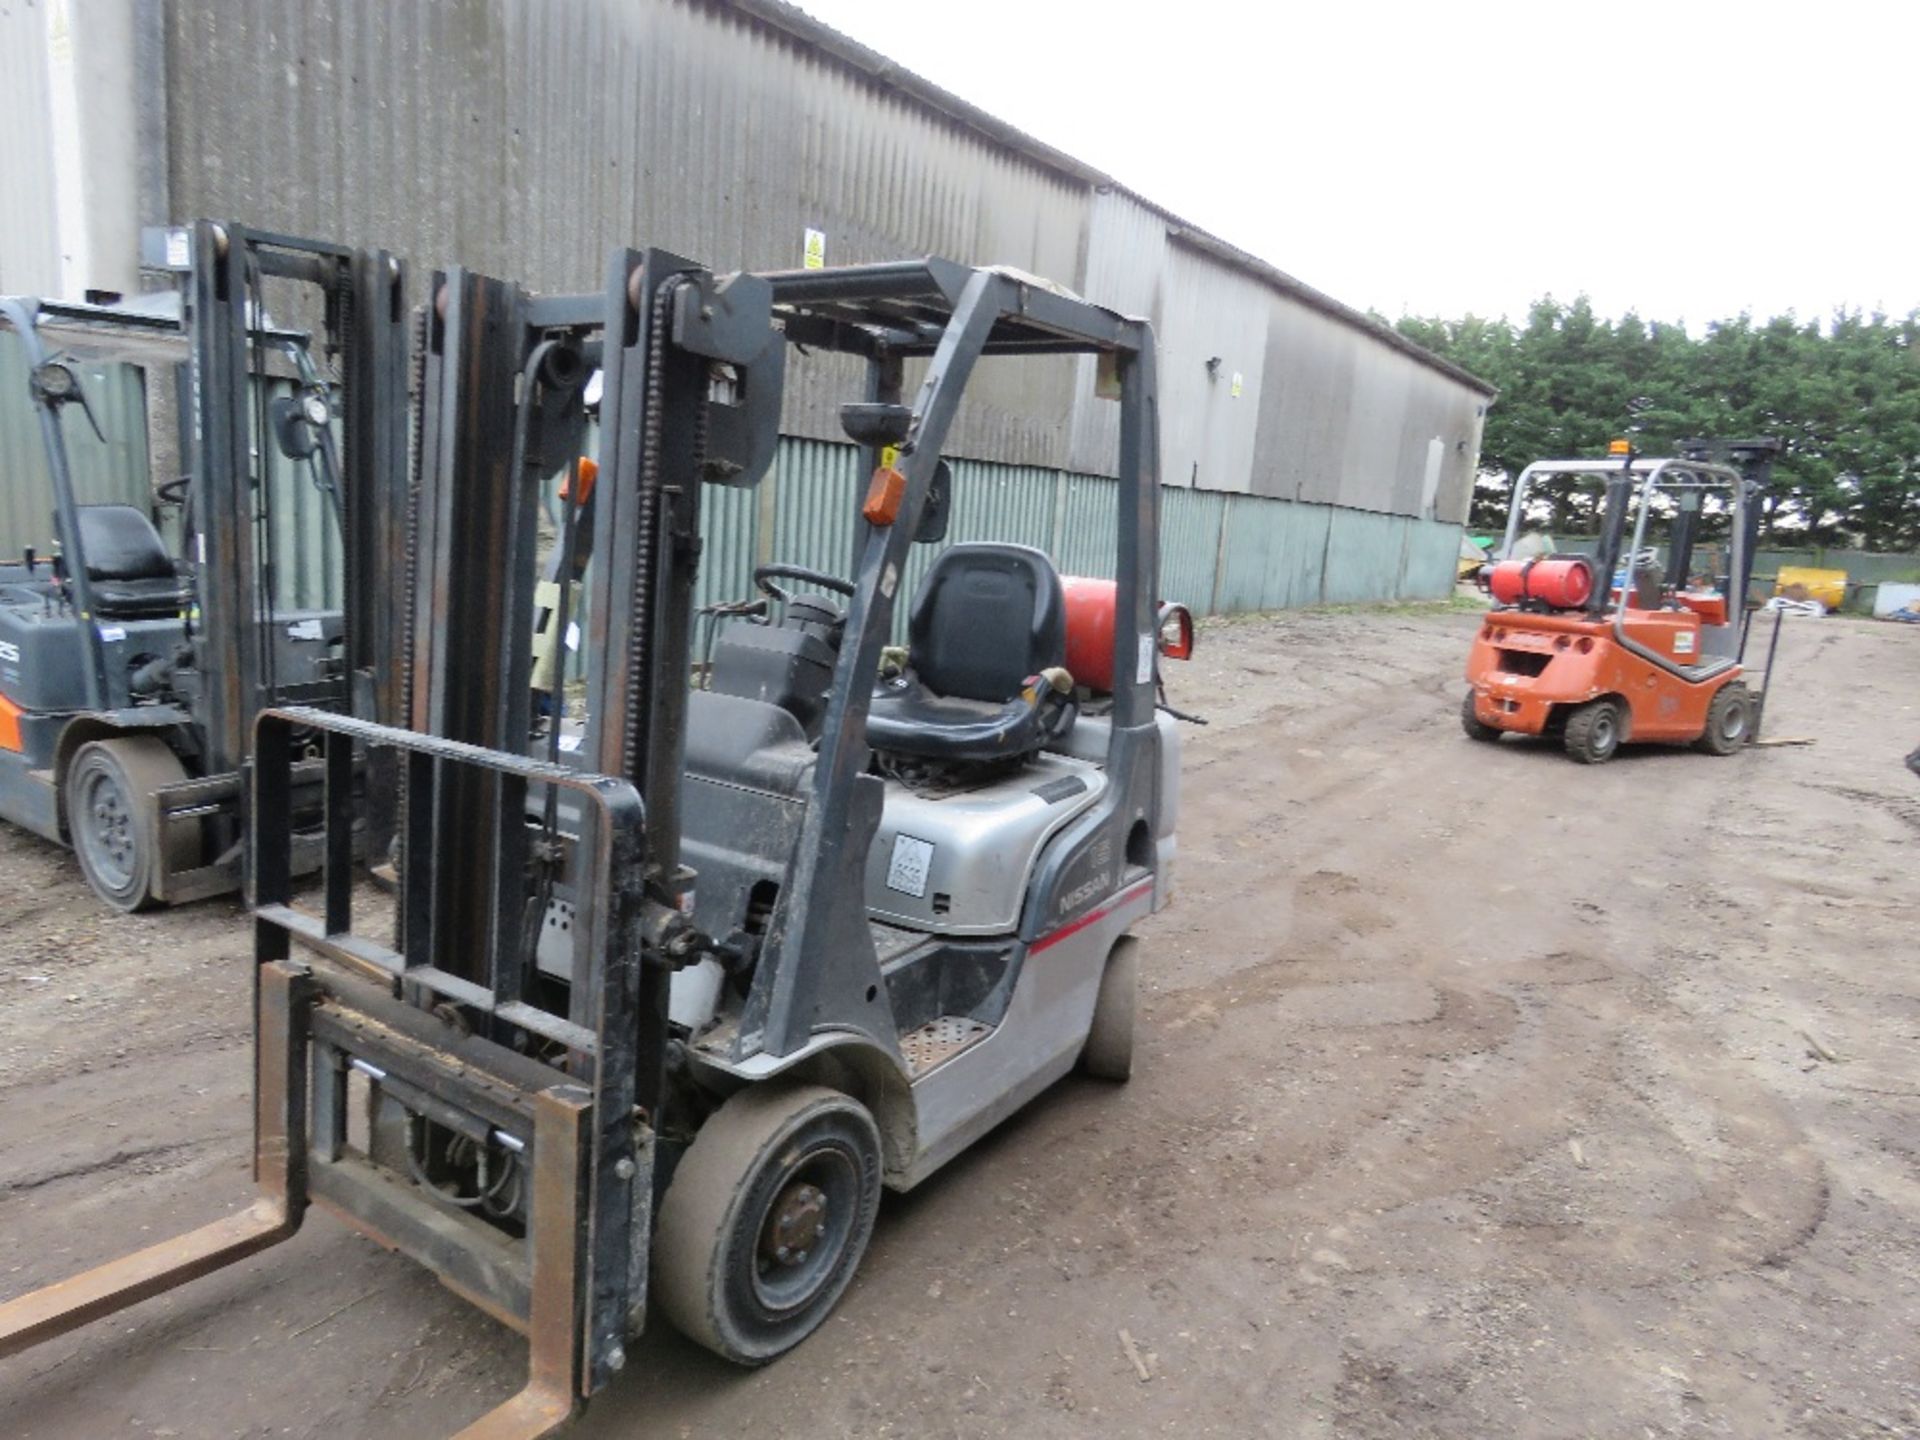 NISSAN 1.5TONNE CAPACITY GAS POWERED FORKLIFT TRUCK SN:L01-000622, 3260 REC HOURS. LOW MAST HEIGHT. - Image 5 of 10